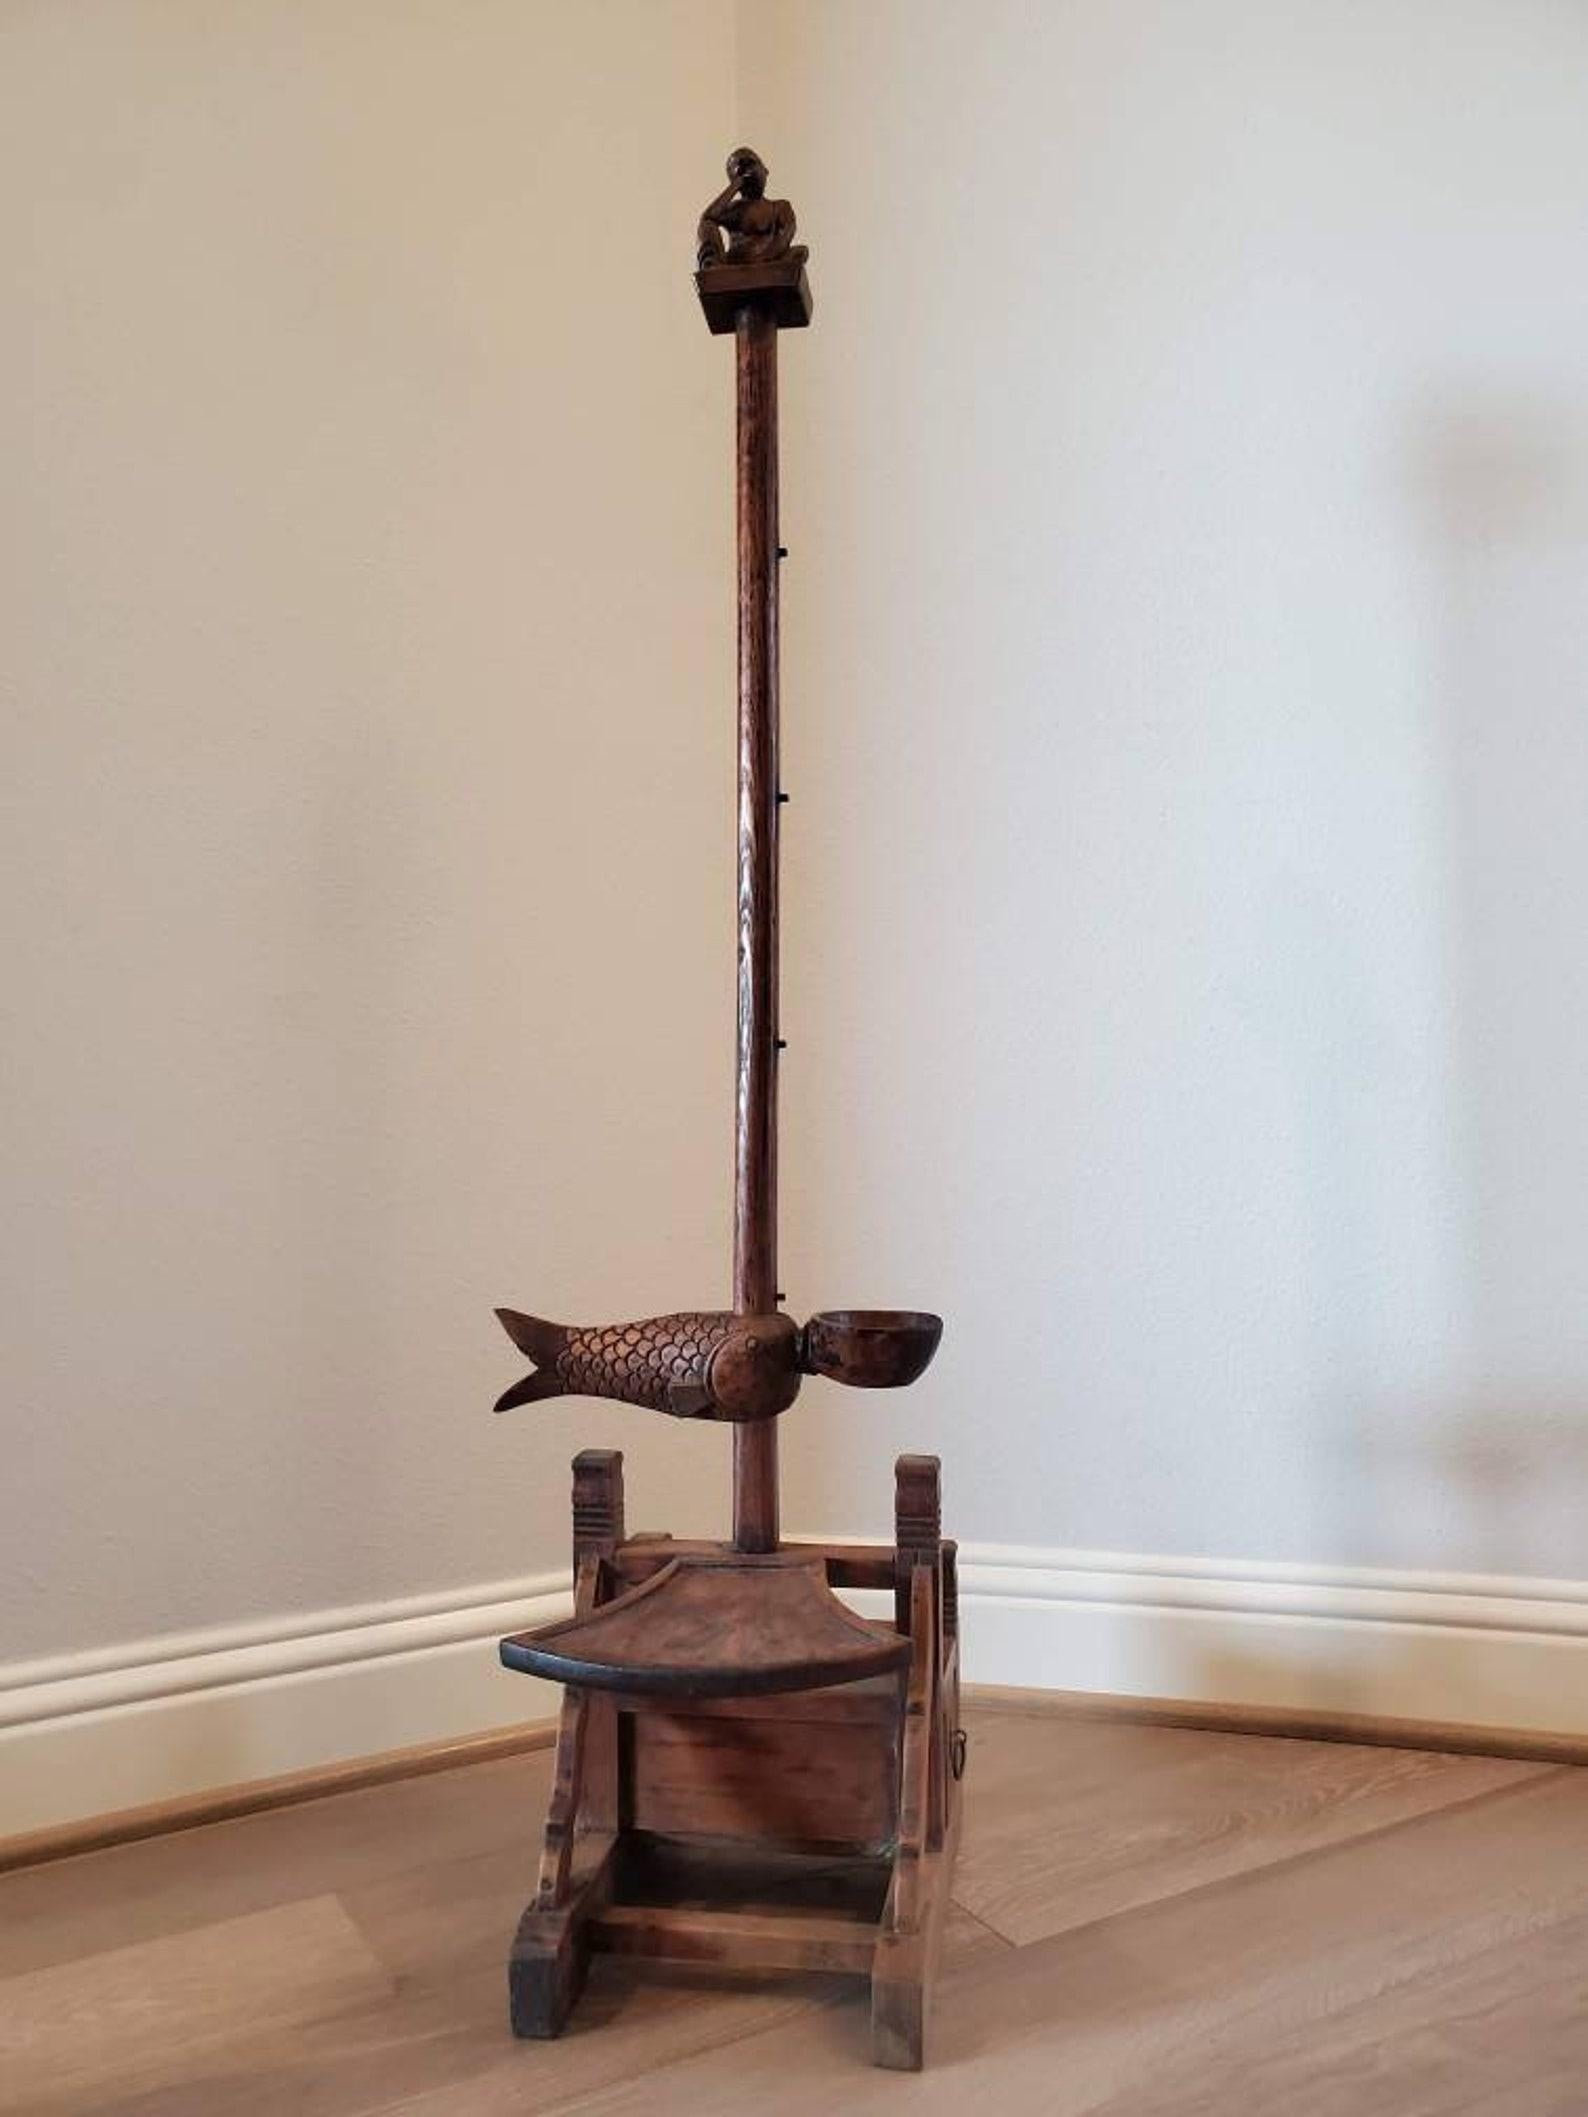 A scarce antique Chinese carved hardwood, most likely elm, adjustable candlestick stand floor torchère with beautifully aged warm rich patina.

Candle floor lamps such as this were used up through the 19th century before the advent of electricity,